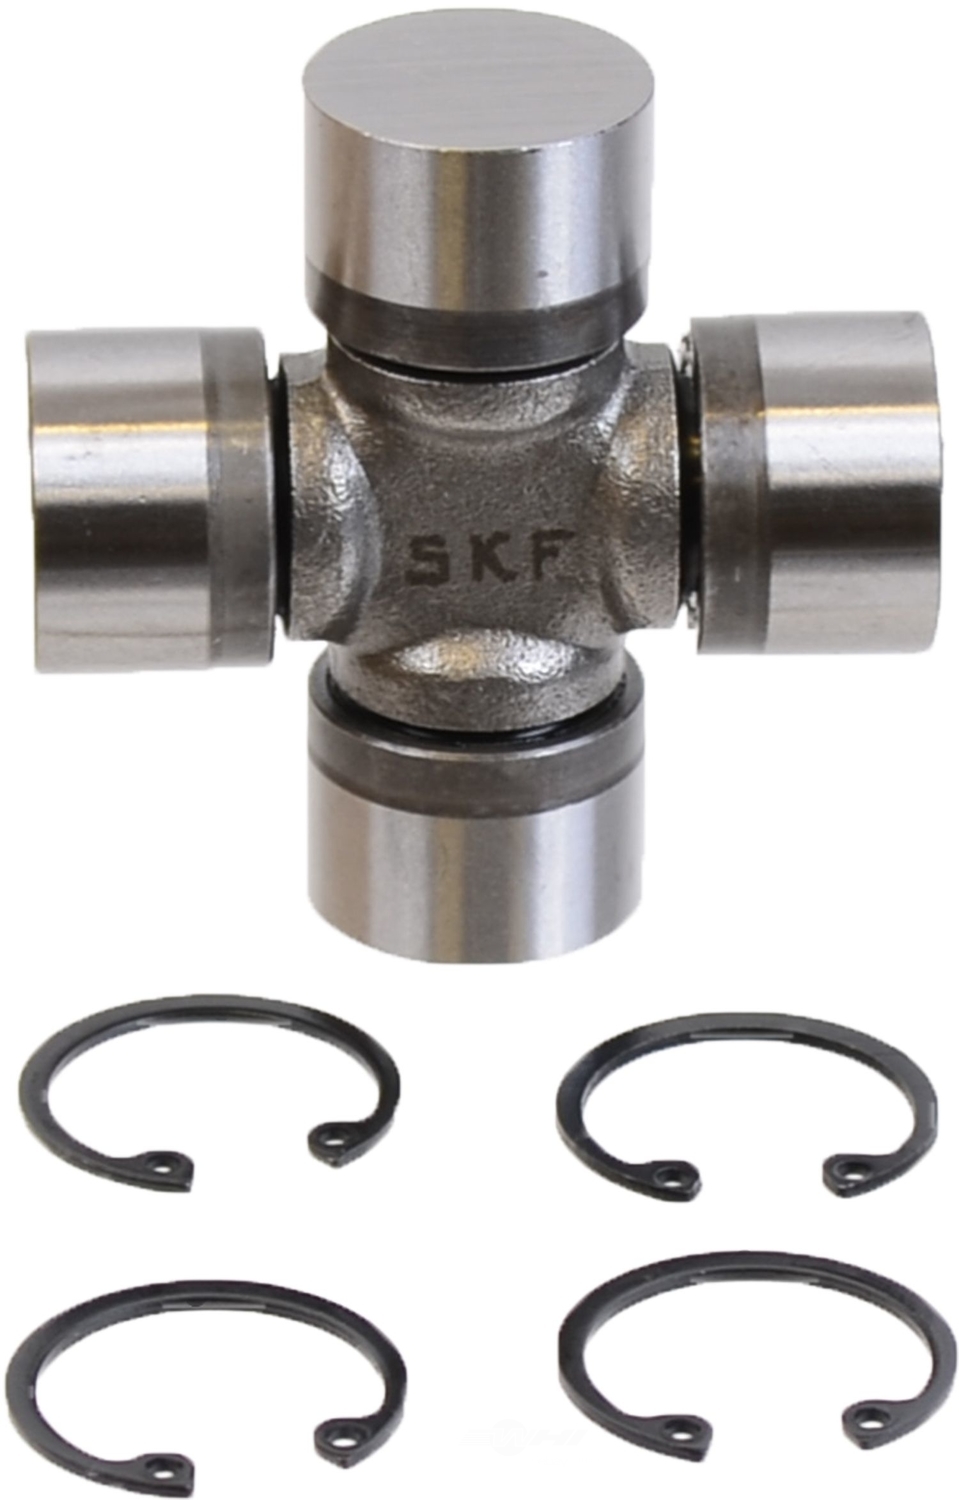 SKF (CHICAGO RAWHIDE) - Universal Joint (Front Shaft Front Joint) - SKF UJ398